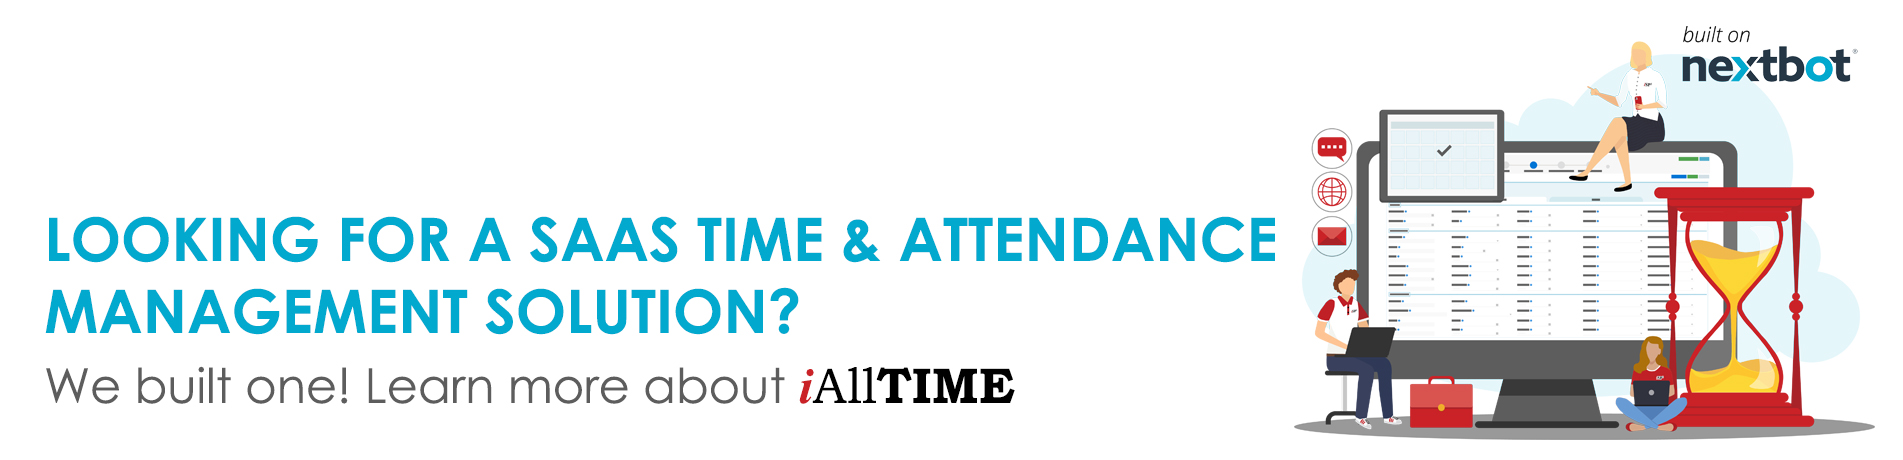 Looking for a SaaS Time & Attendance Management Solution? Talk to us about iAllTIME built on Nextbot.